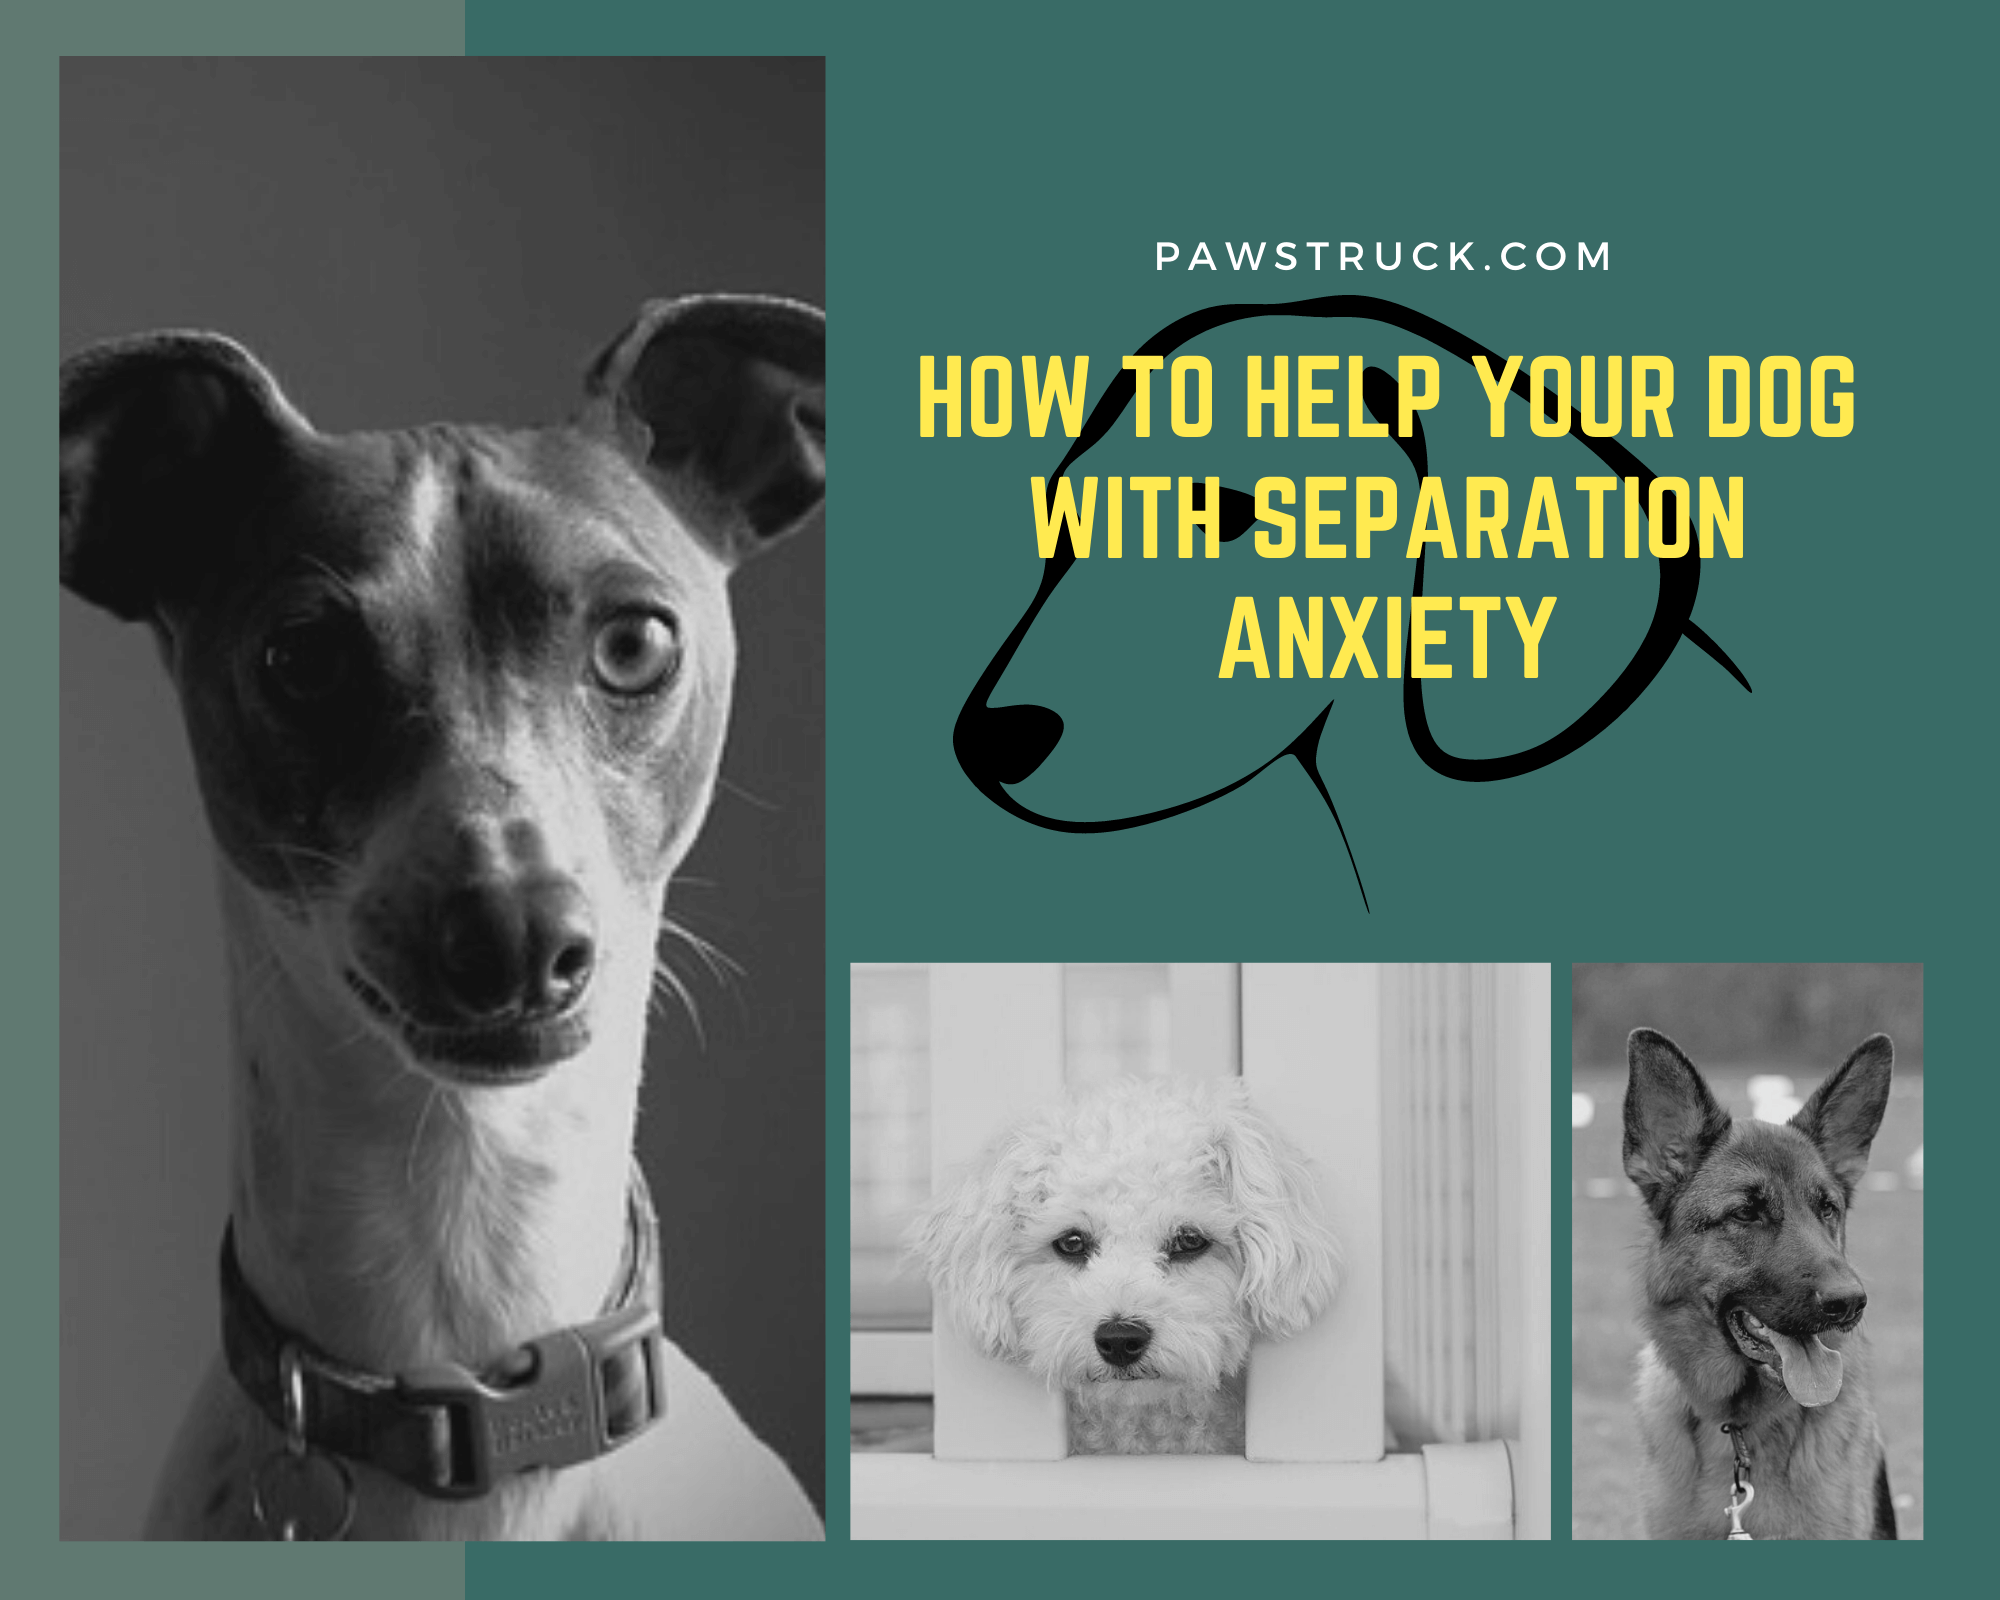 How to Help Your Dog with Separation Anxiety